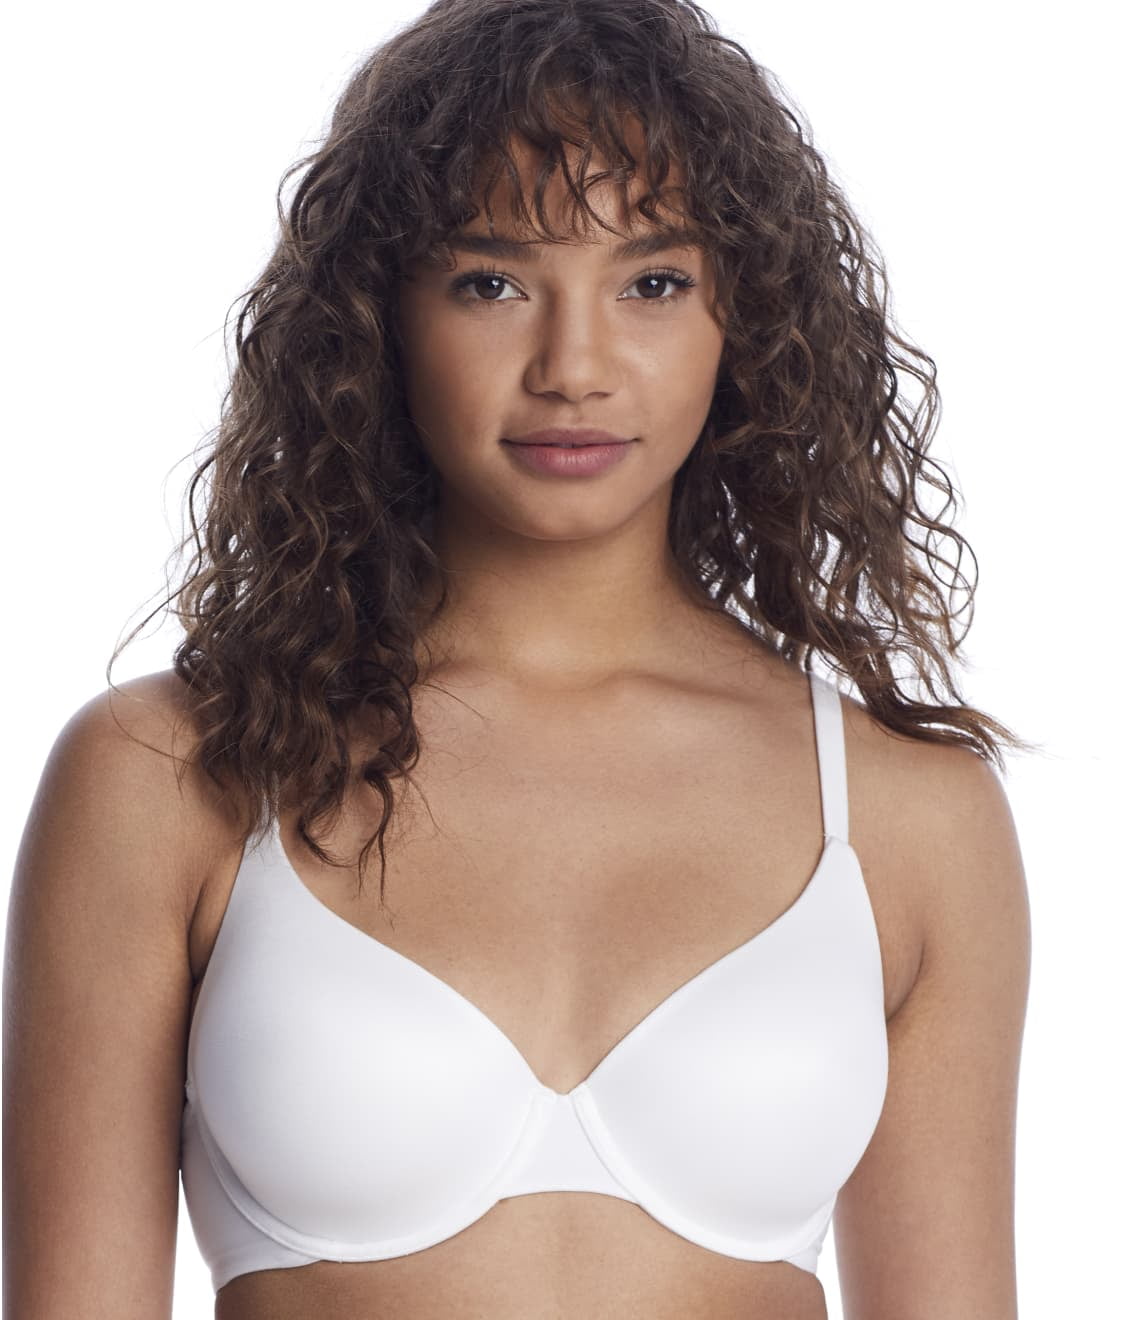 REVEAL Pearl White The Perfect Demi Underwire Bra, US 42C, UK 42C, NWOT